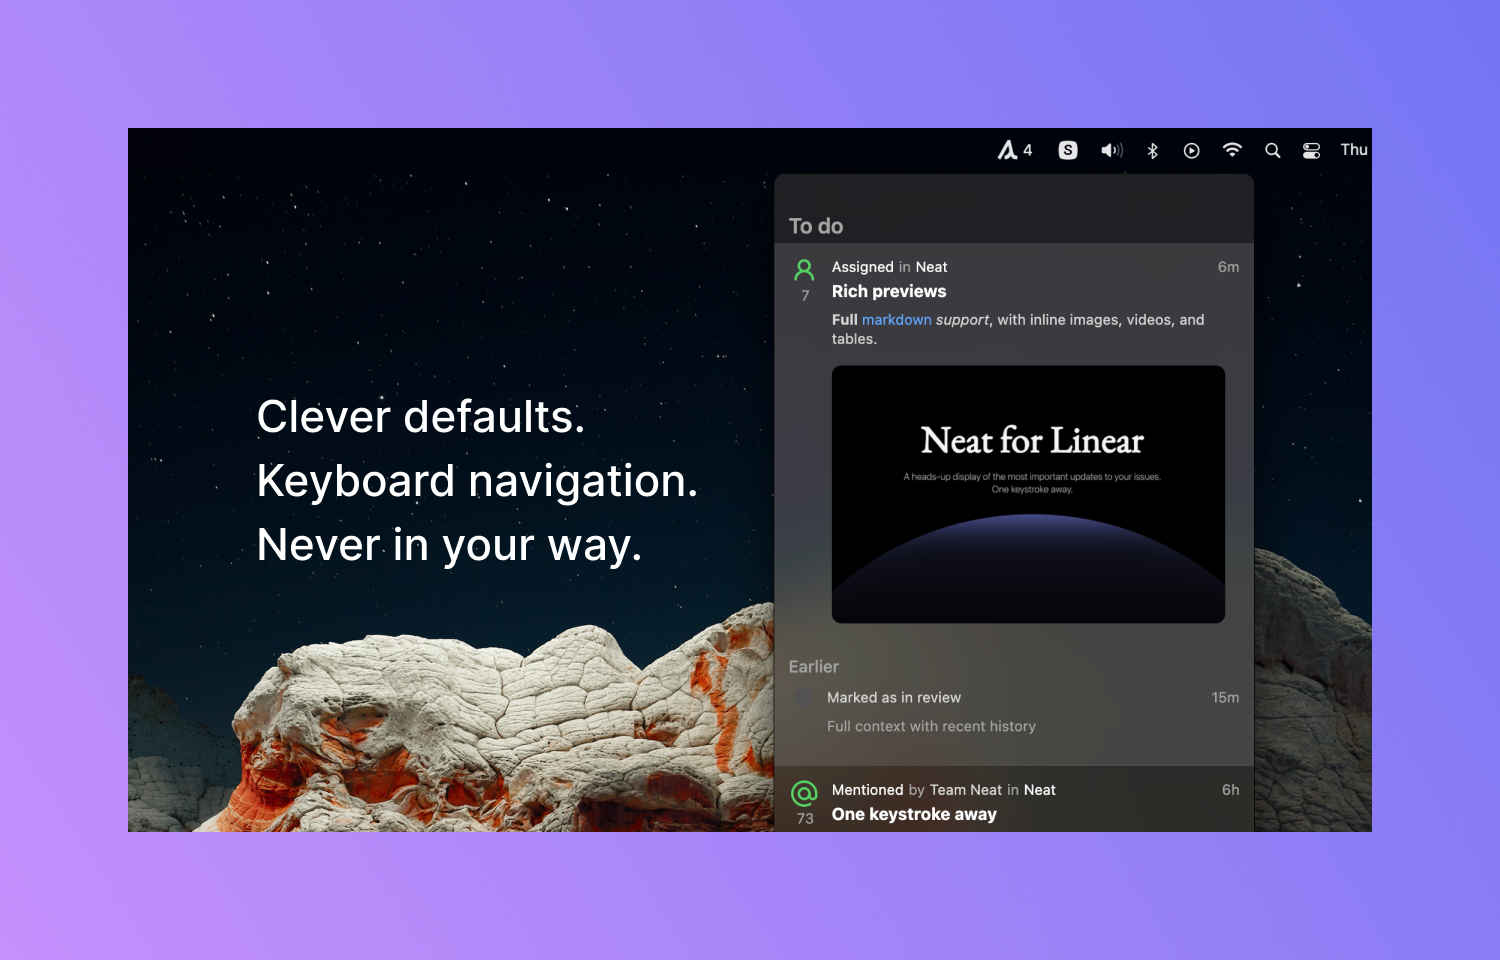 Clever defaults. Keyboard navigation. Never in your way.